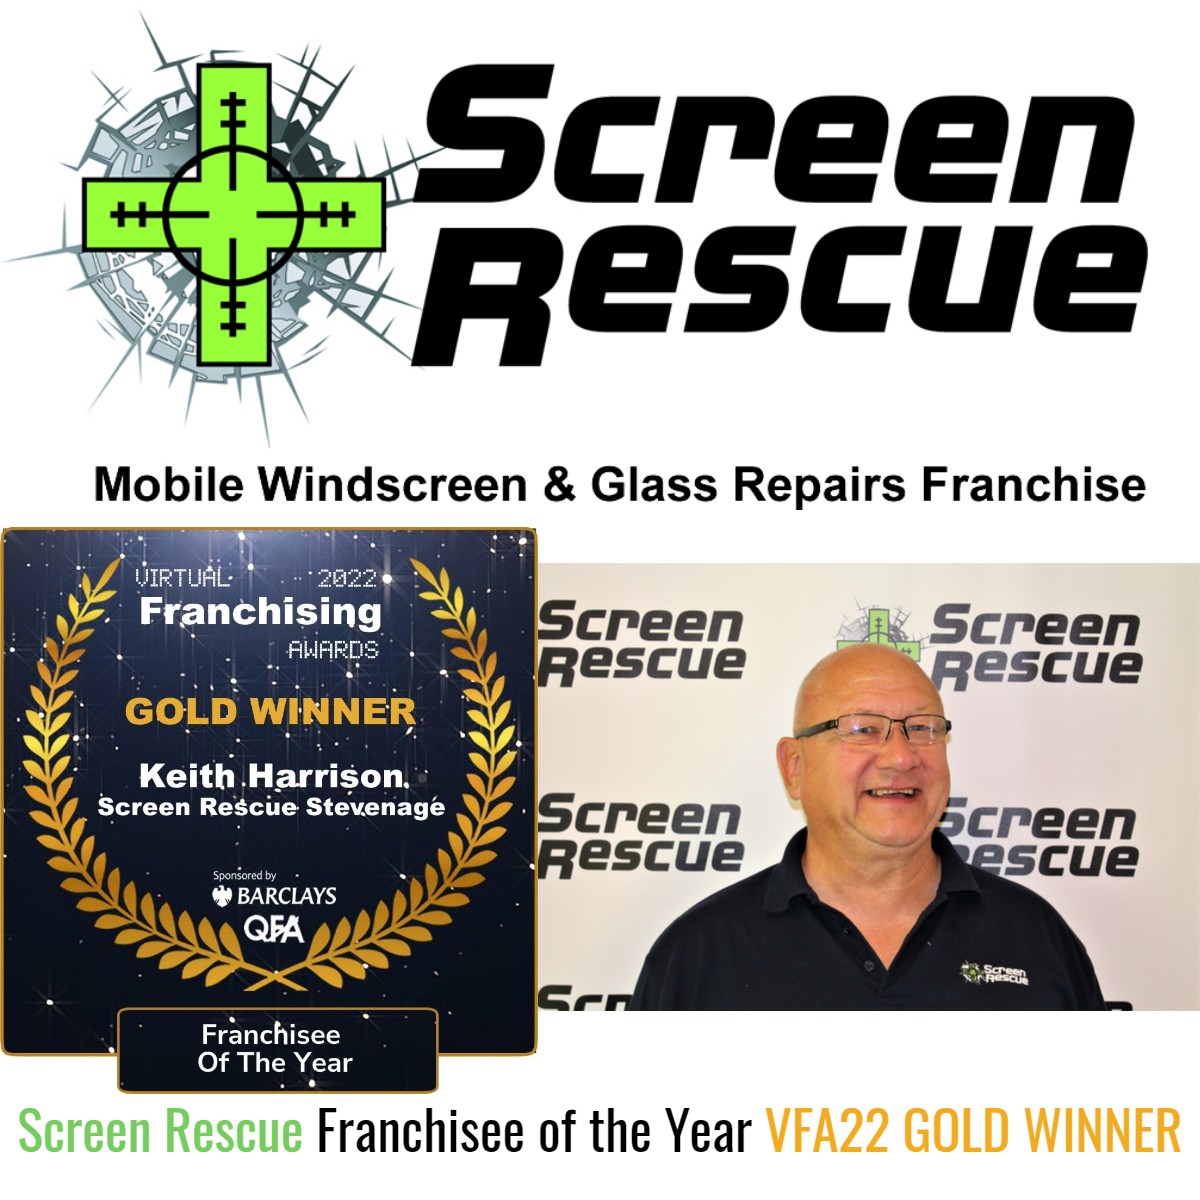 VFA22 ‘Franchisee of the Year’ GOLD WINNER is Keith Harrison of Screen Rescue Stevenage